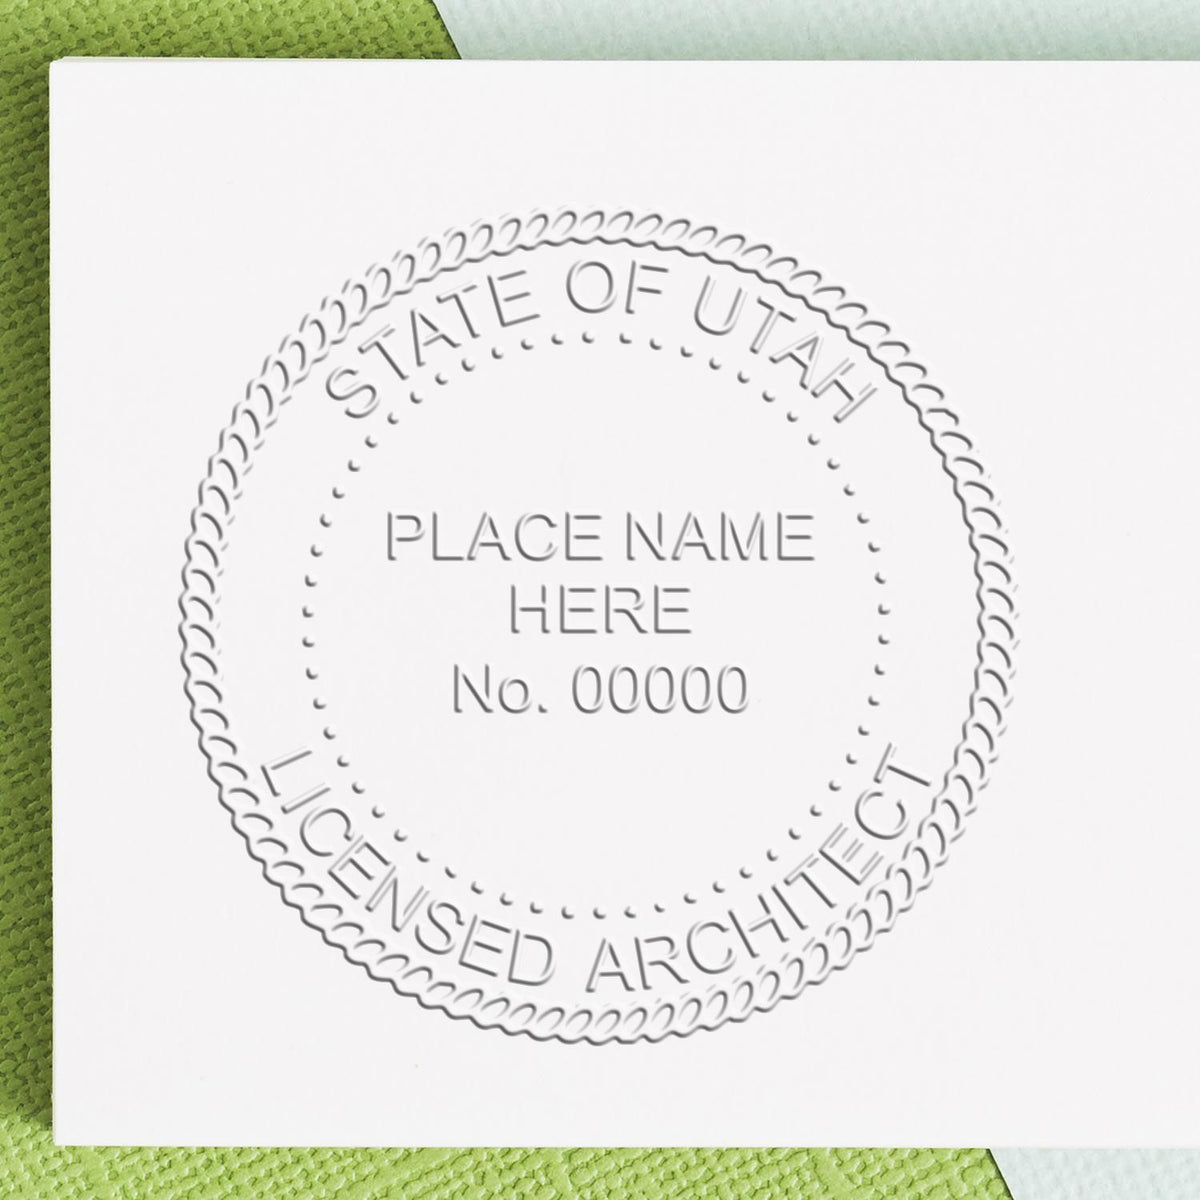 This paper is stamped with a sample imprint of the Extended Long Reach Utah Architect Seal Embosser, signifying its quality and reliability.